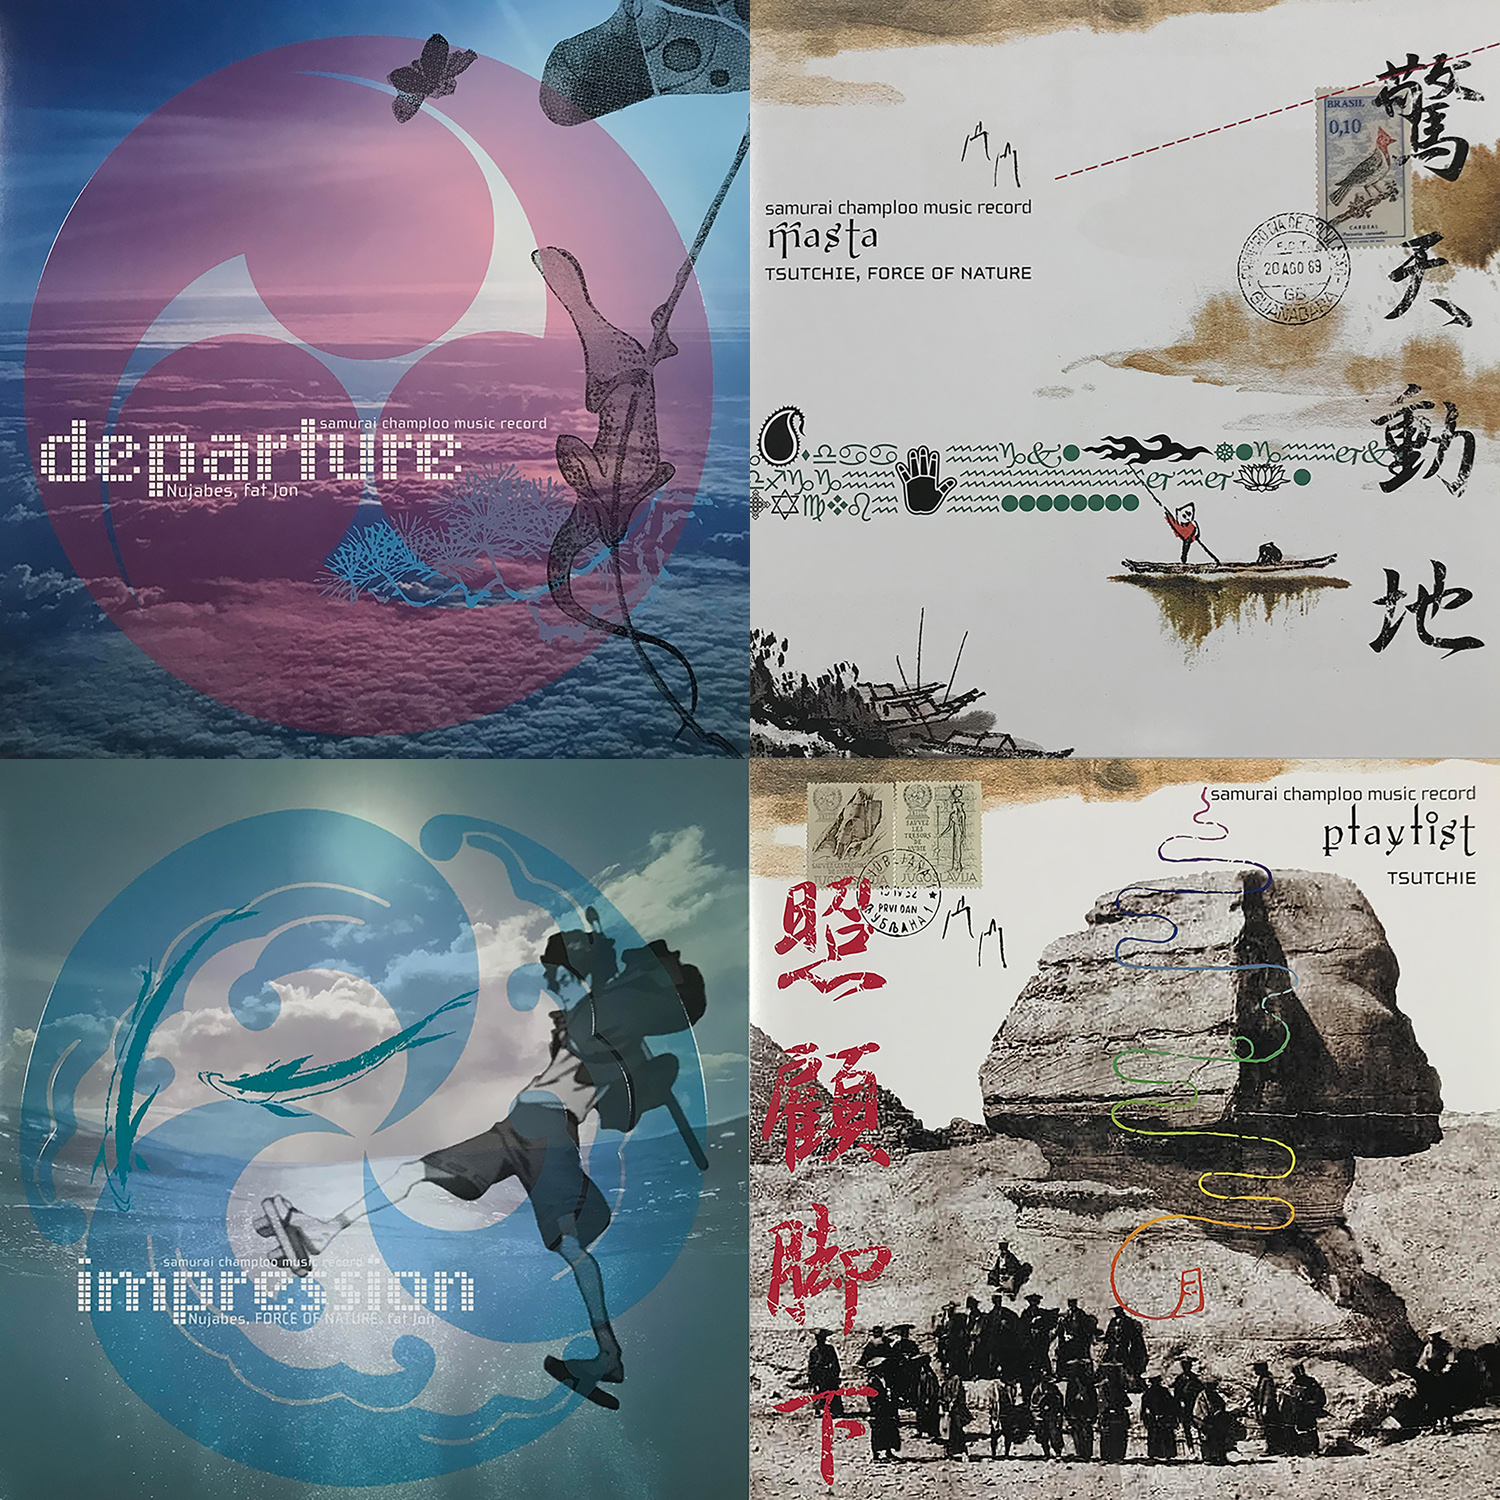 SamuraiChamploo-CD-jacket 20th Anniversary of Samurai Champloo TV Broadcast Reissue of Four Titles by Nujabes, fat jon, FORCE OF NATURE, and Tsutchie!